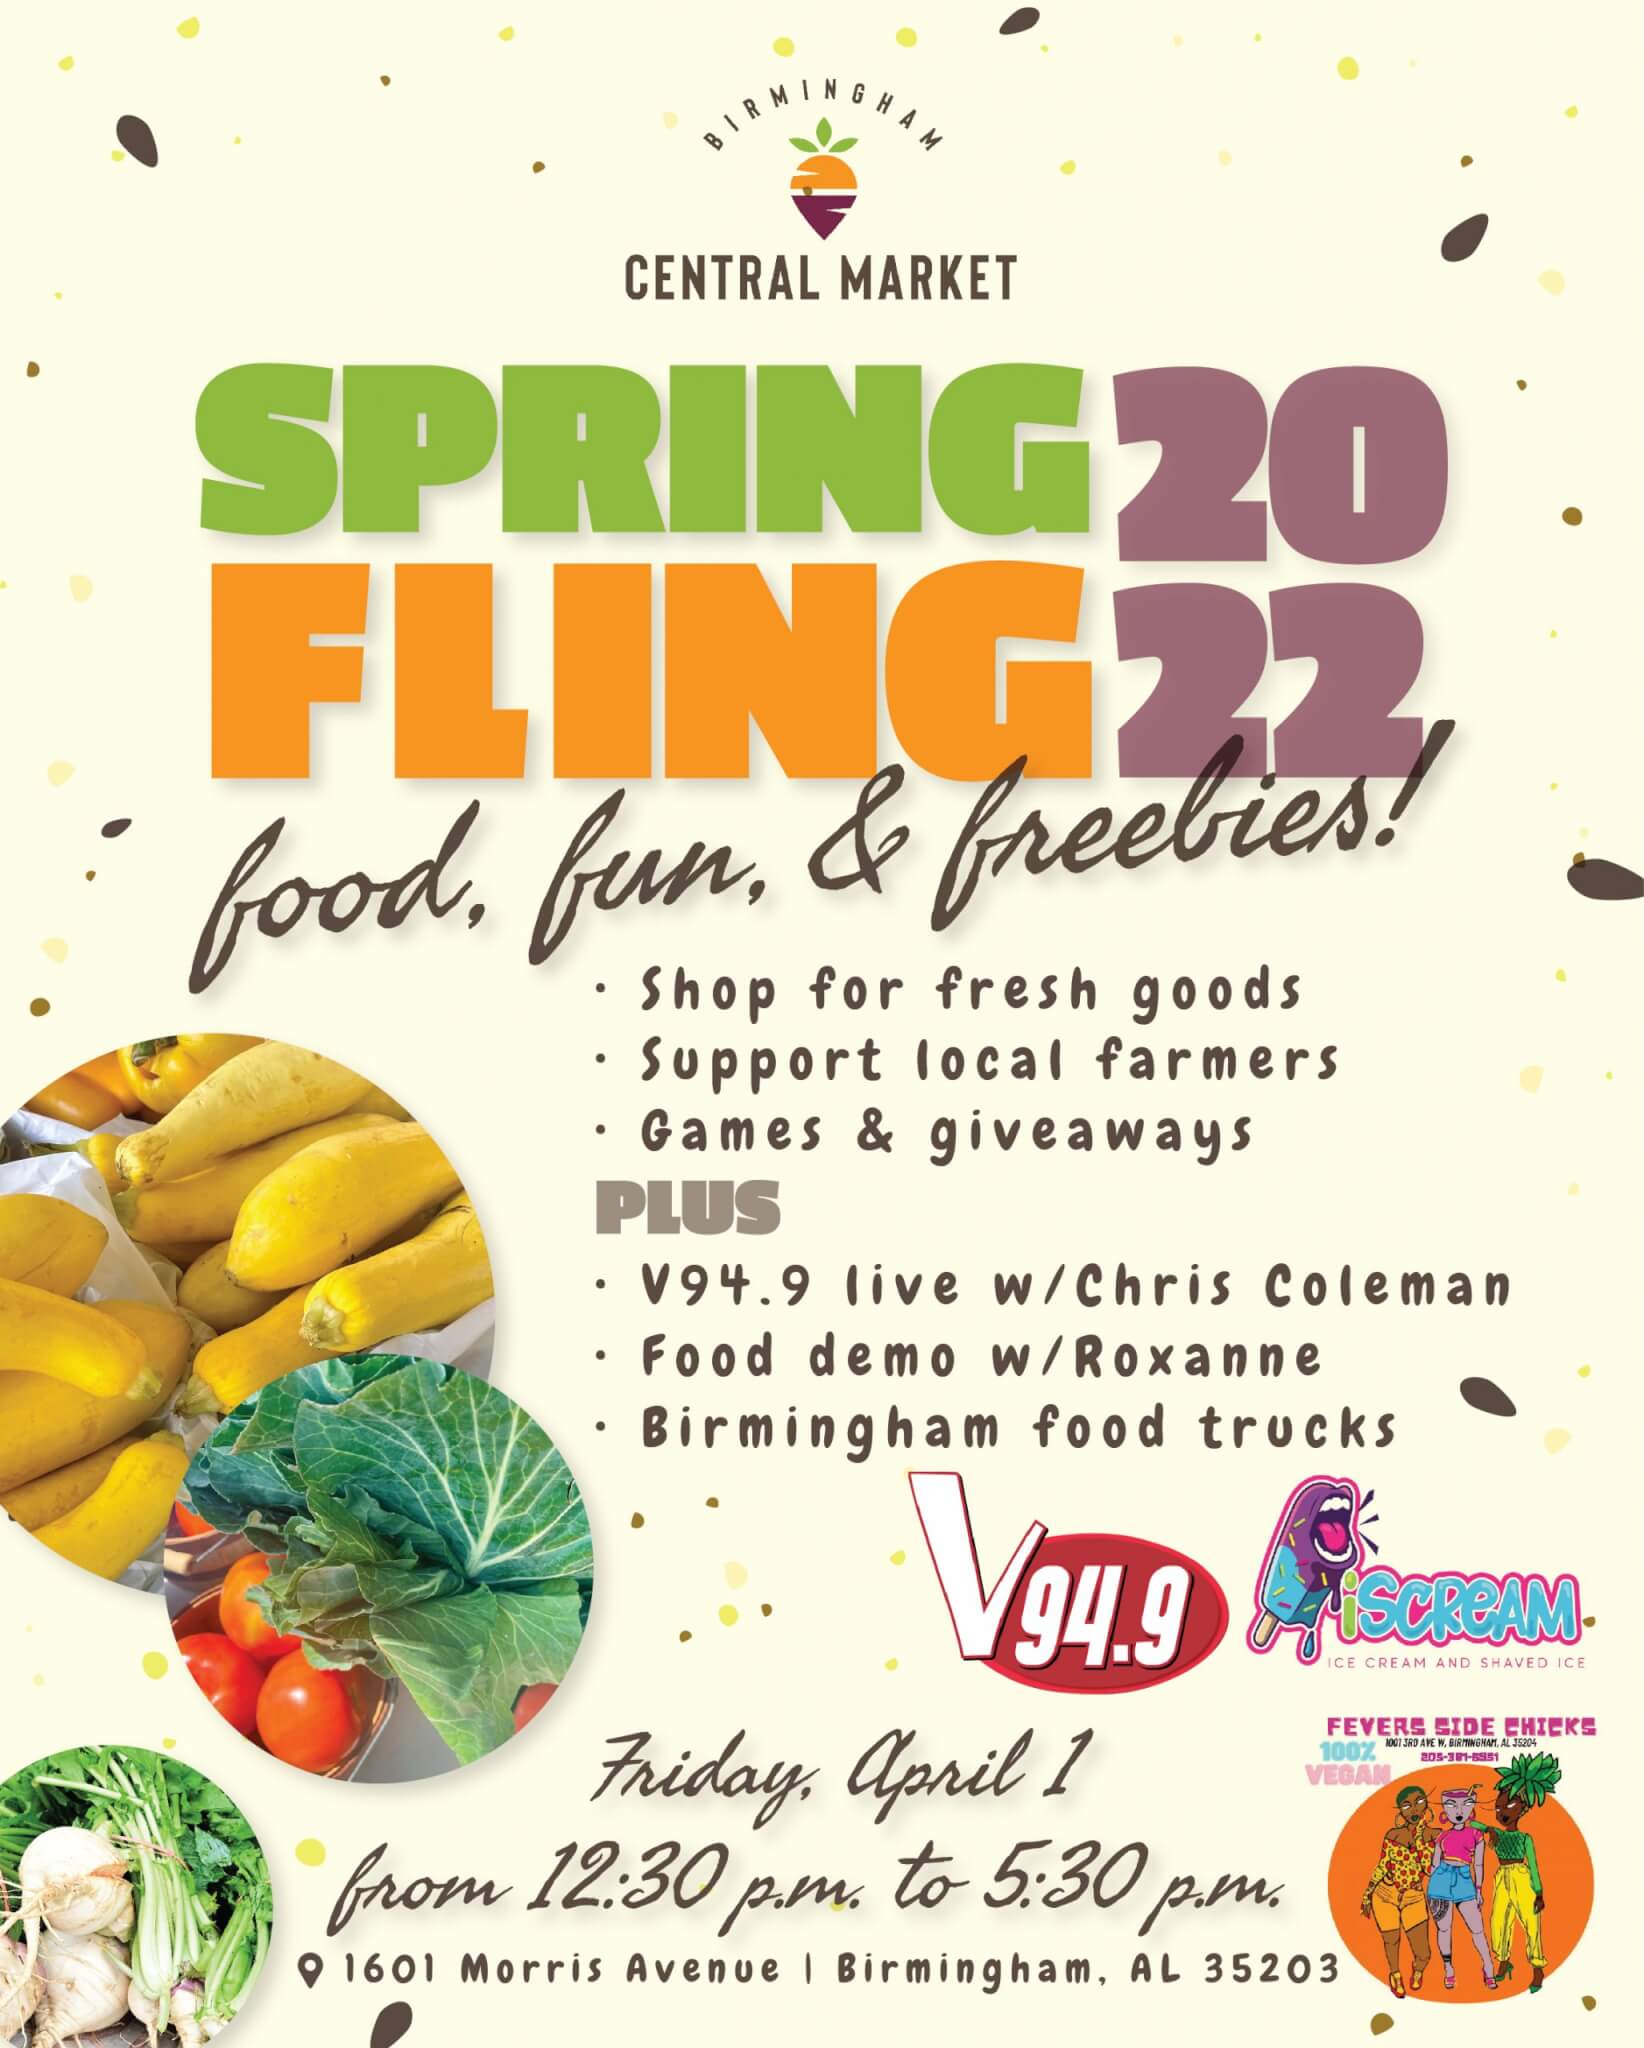 The BCM's Spring Fling is Friday, April 1st! Join us for food, fun, & freebies!